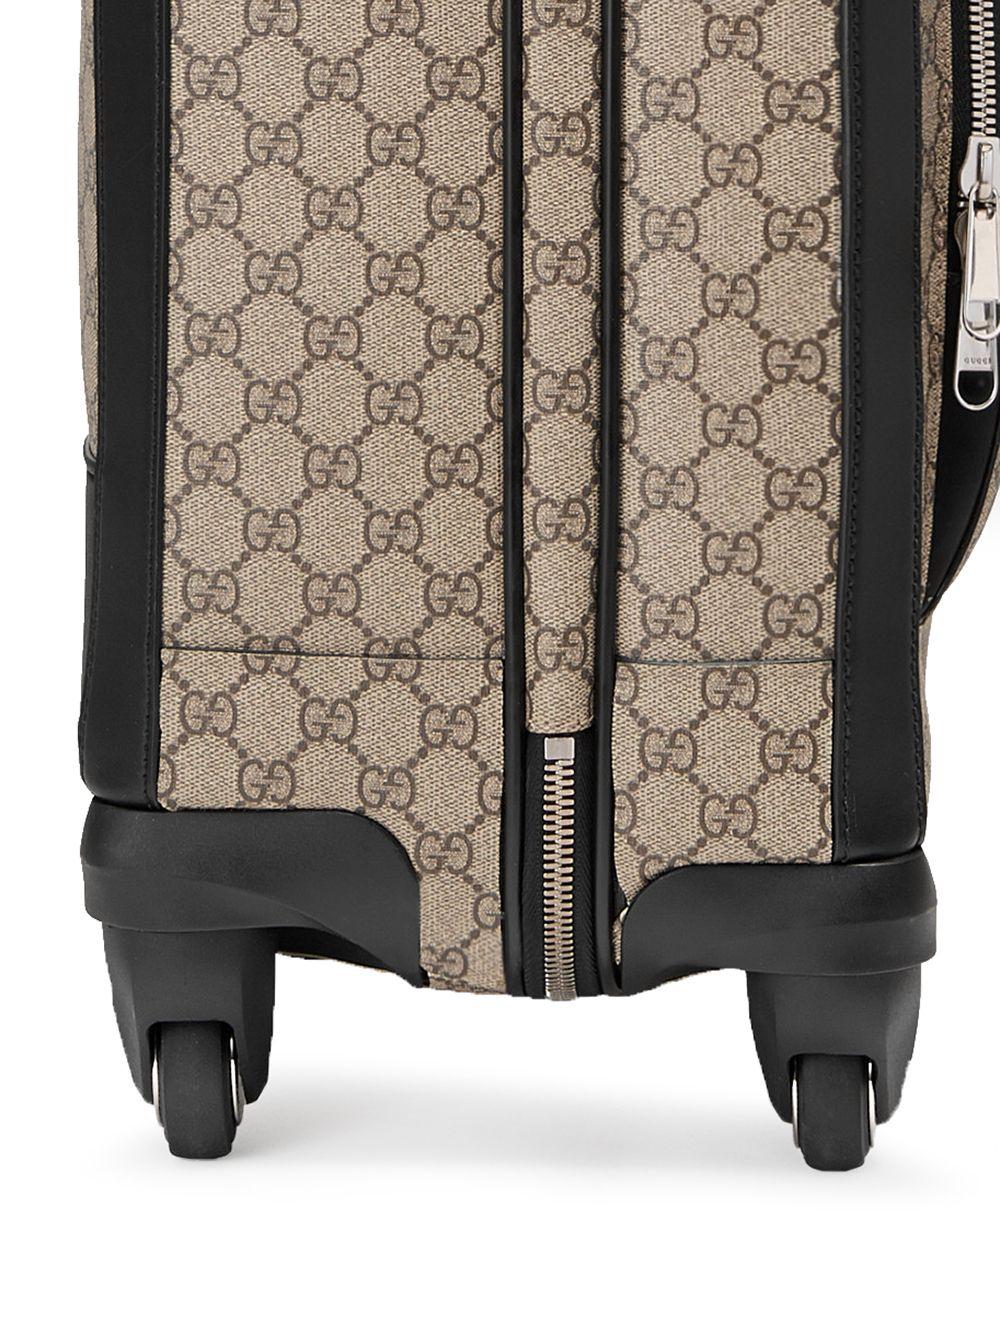 GG Supreme Small Carry On Suitcase in Black - Gucci